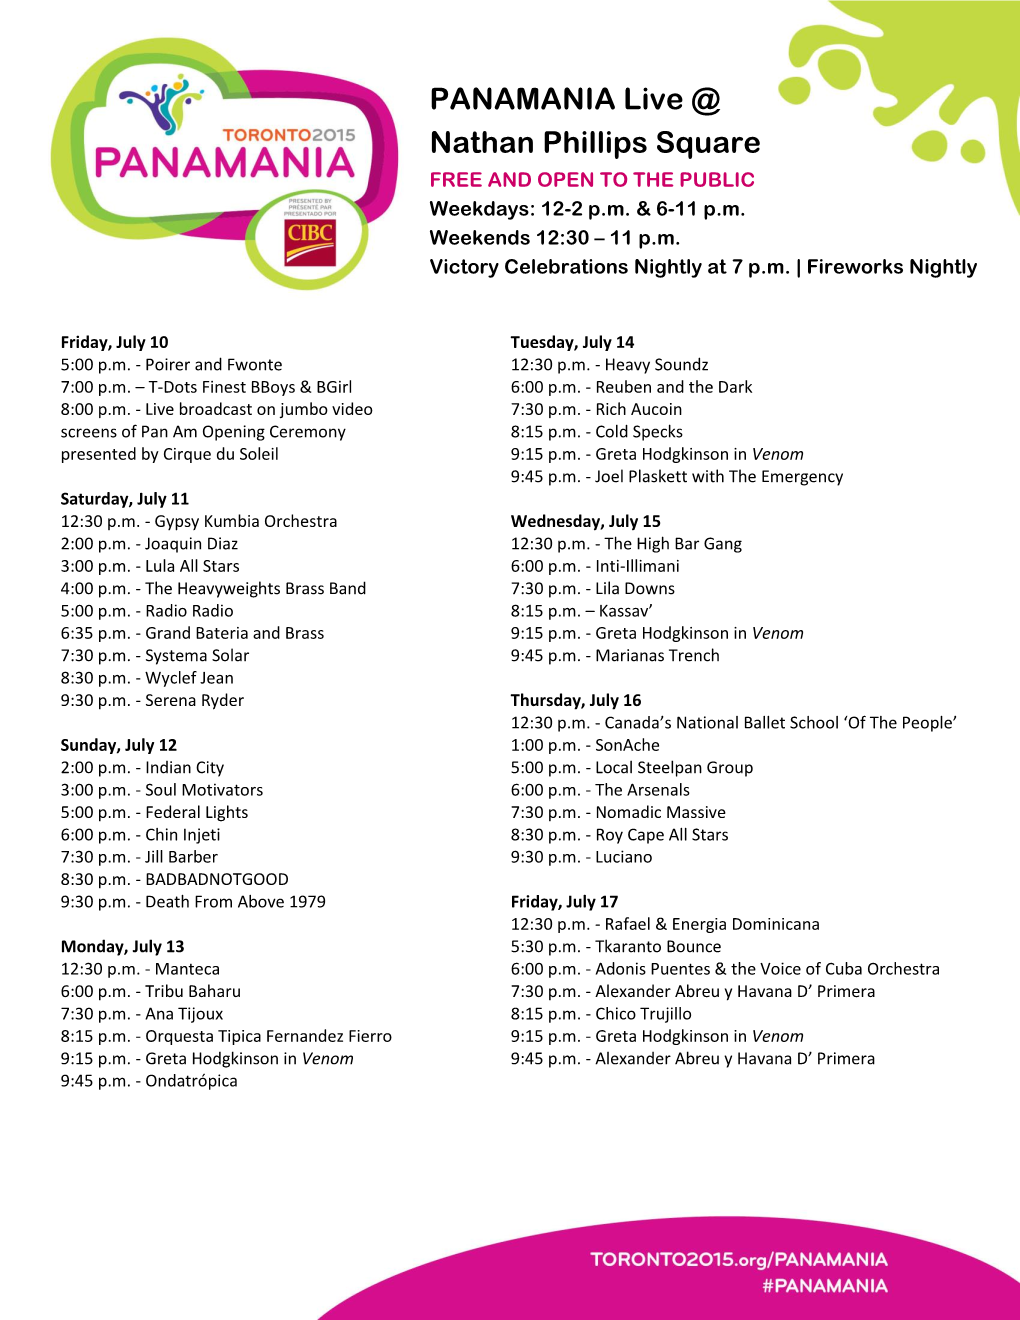 PANAMANIA Live @ Nathan Phillips Square FREE and OPEN to the PUBLIC Victory Celebrations Nightly at 7 P.M